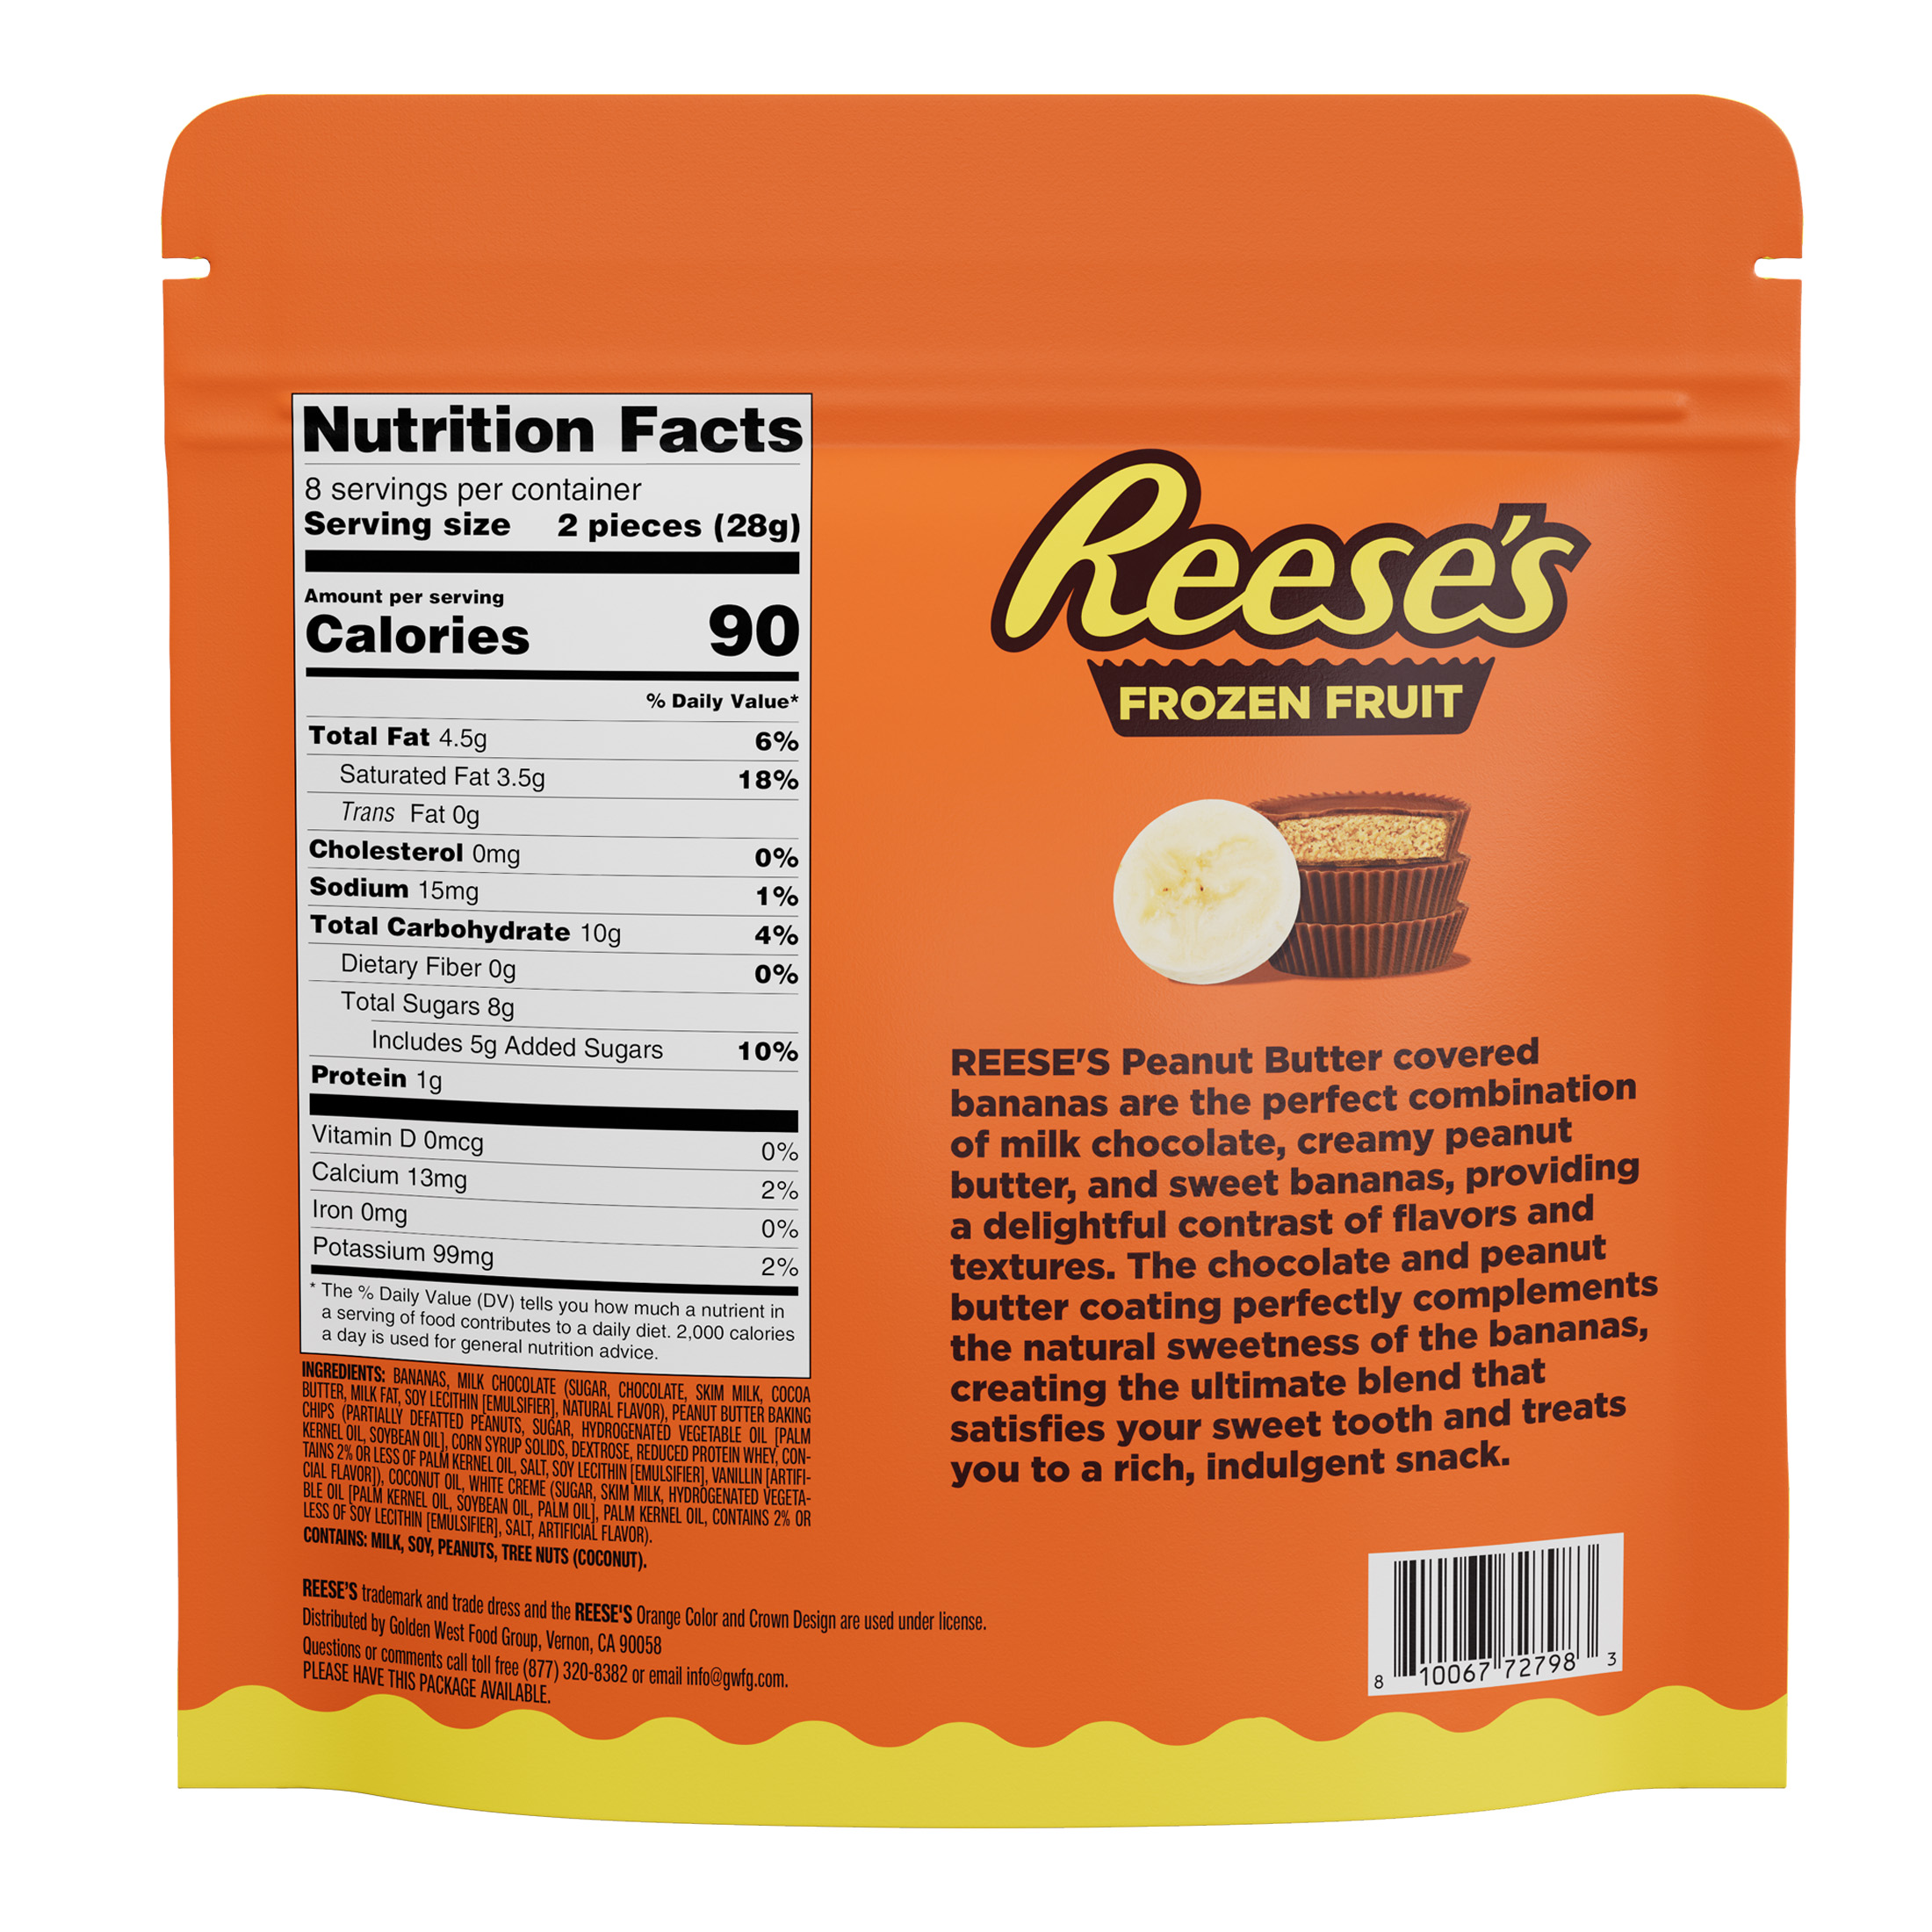 Reese’s Banana Slices in Milk Chocolate and Reese's Peanut Butter Chips, 8 oz (Frozen) - image 4 of 5